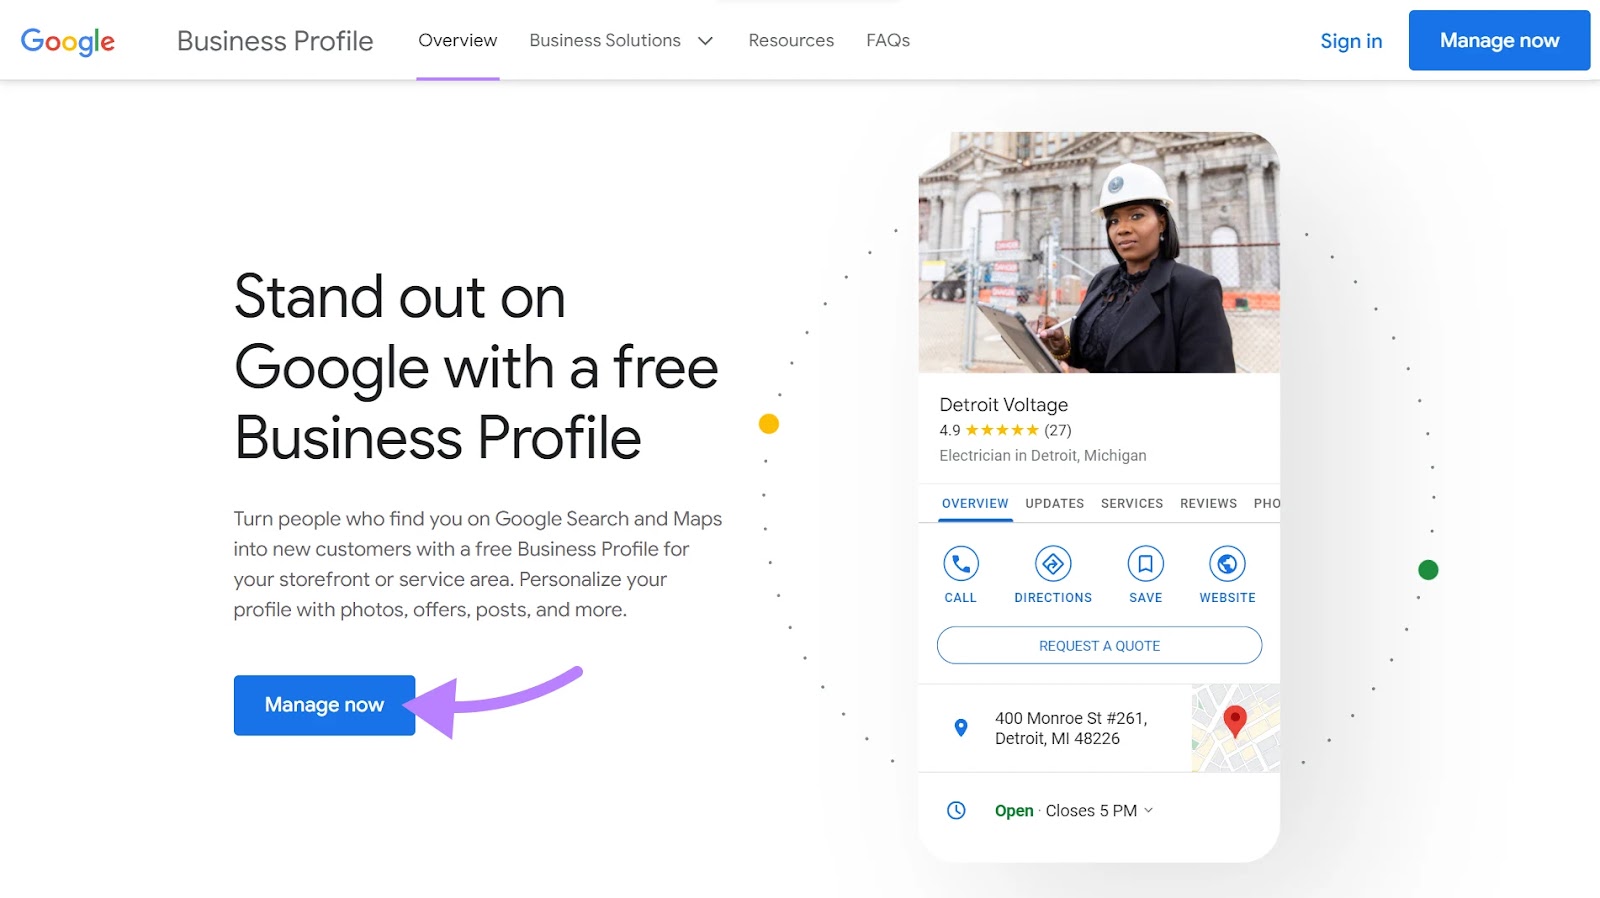 "Manage now" button on Google Business Profile page